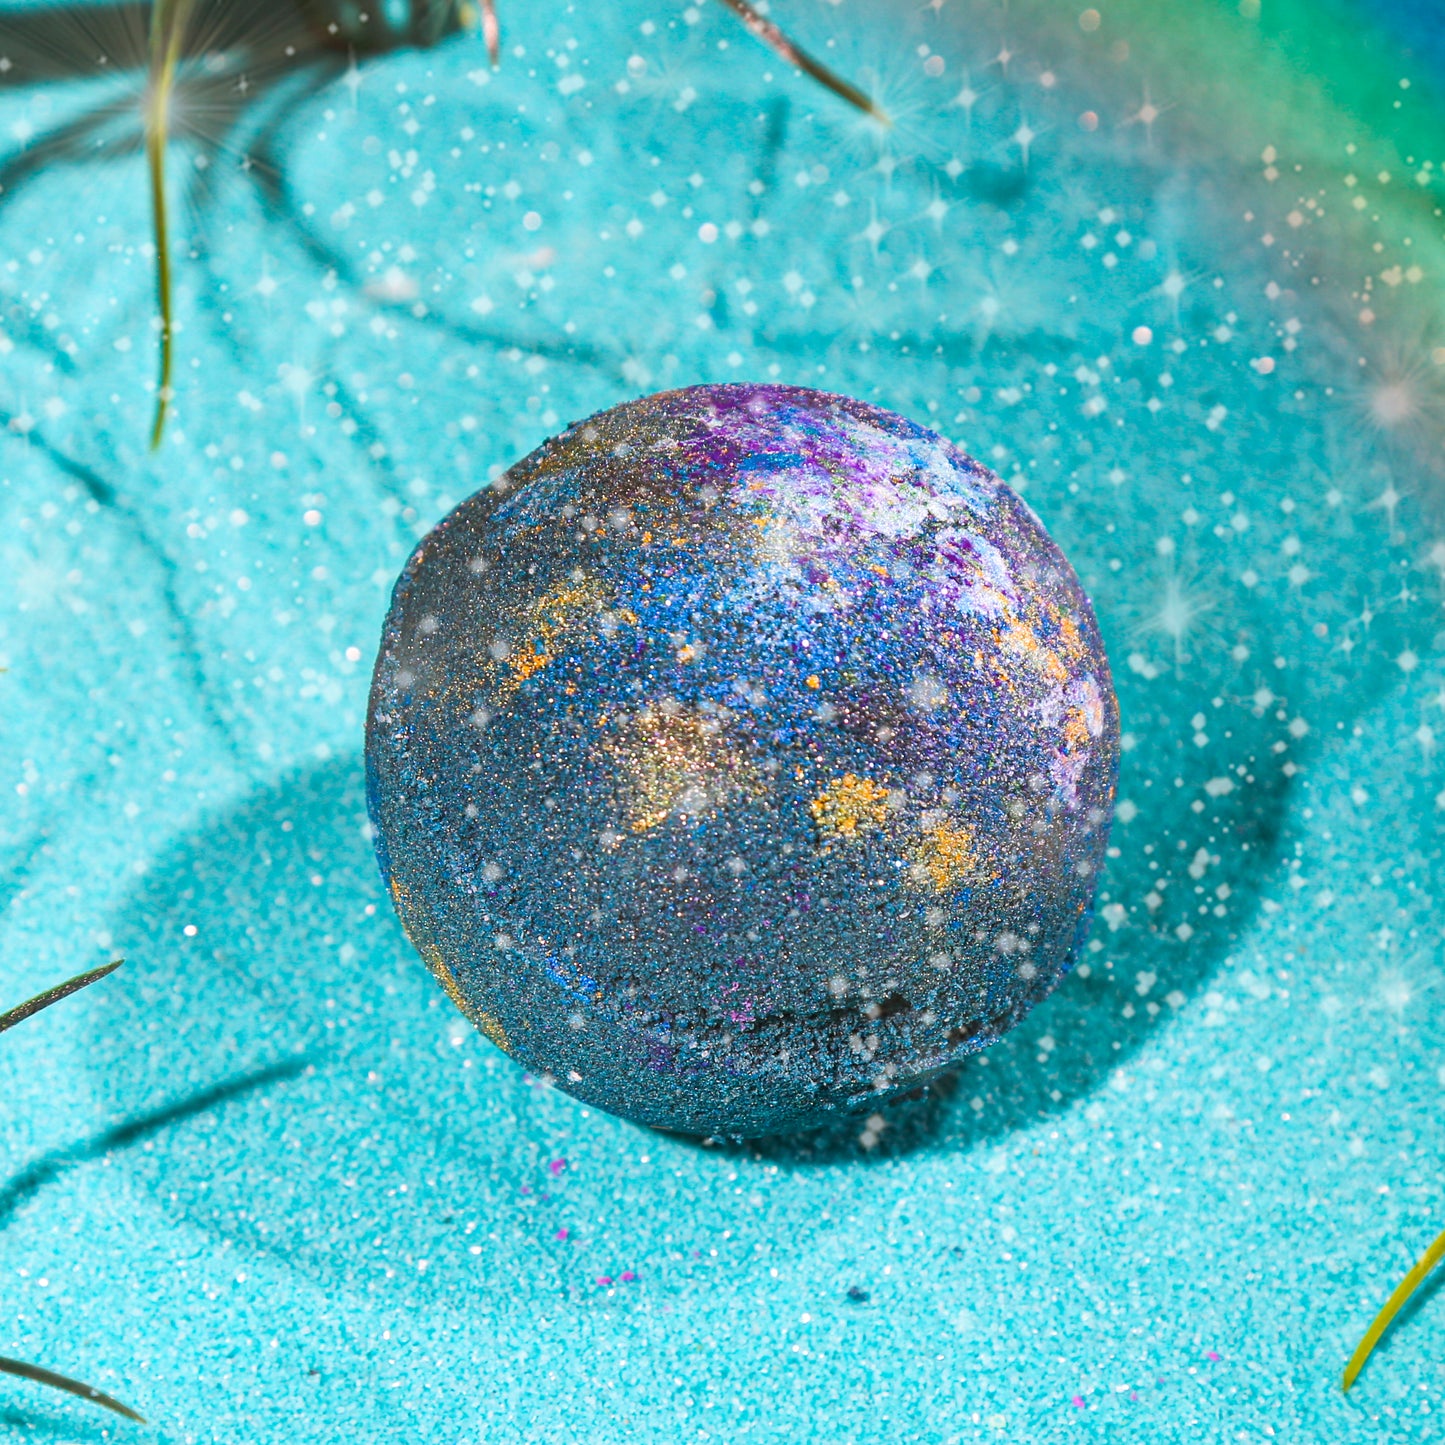 SECOND STAR TO THE RIGHT Bath Bomb